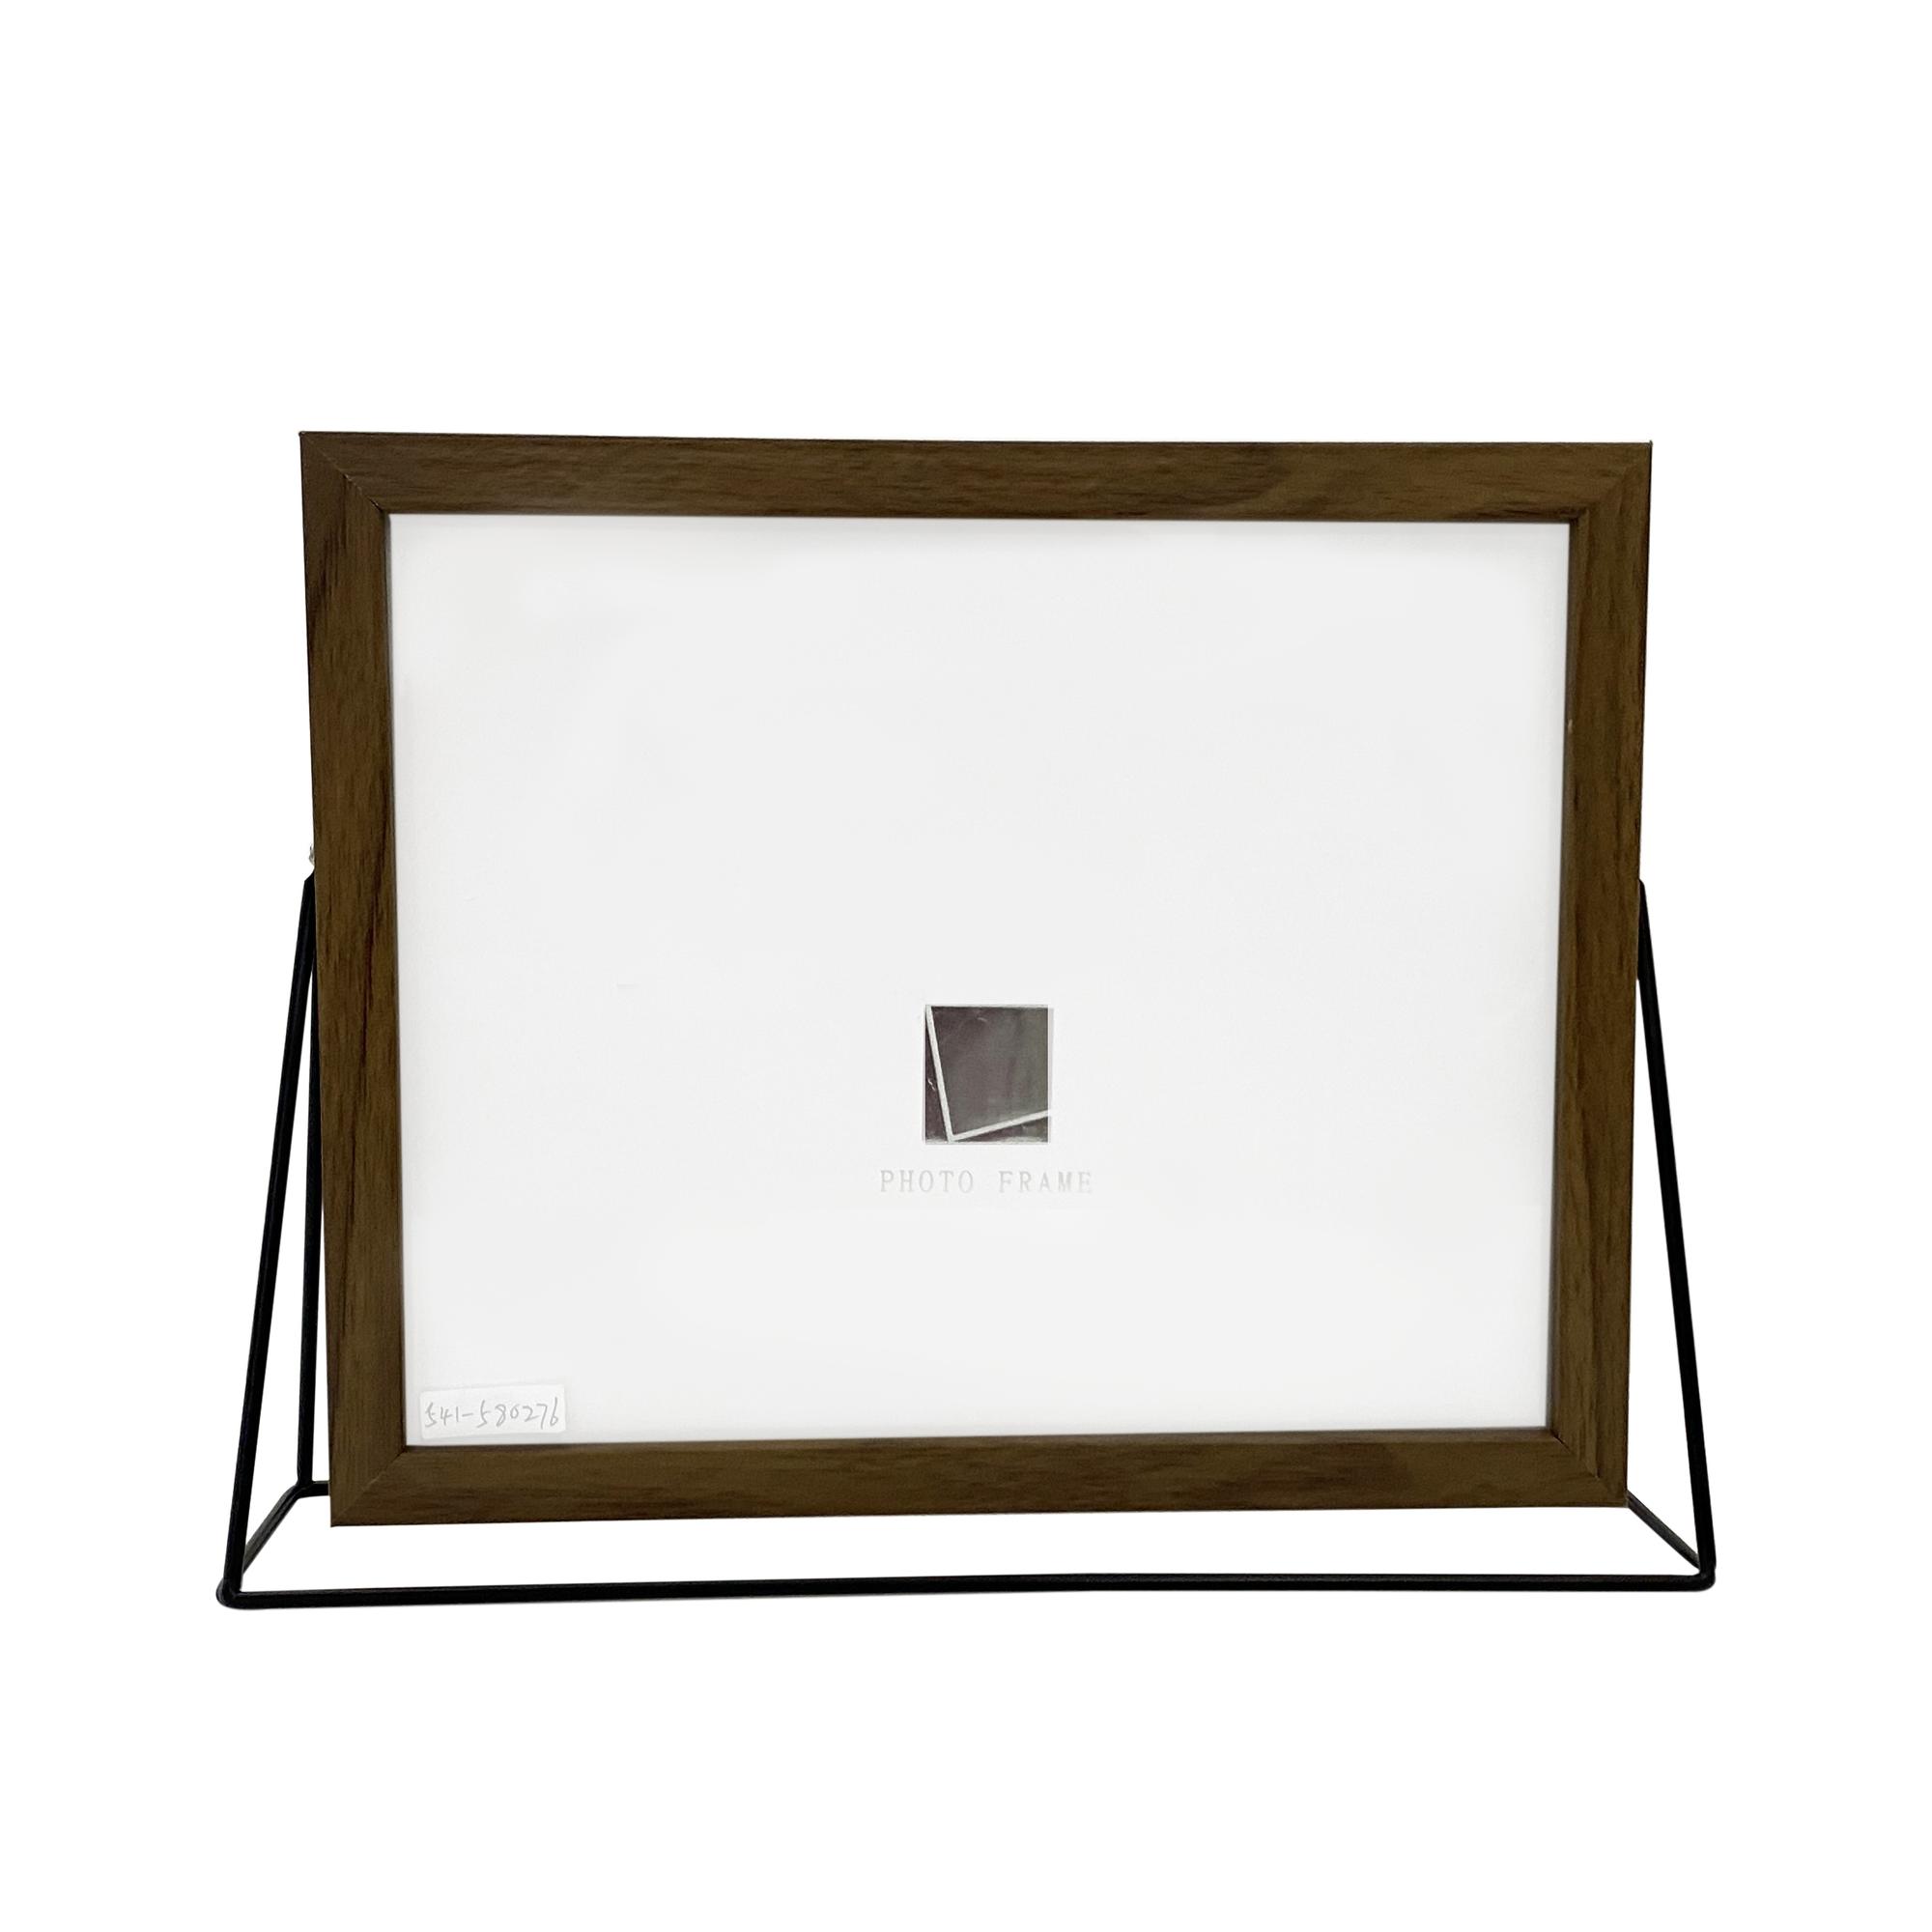 PICTURE FRAME 8X10 30.3X23.3X8CM - 541-580276